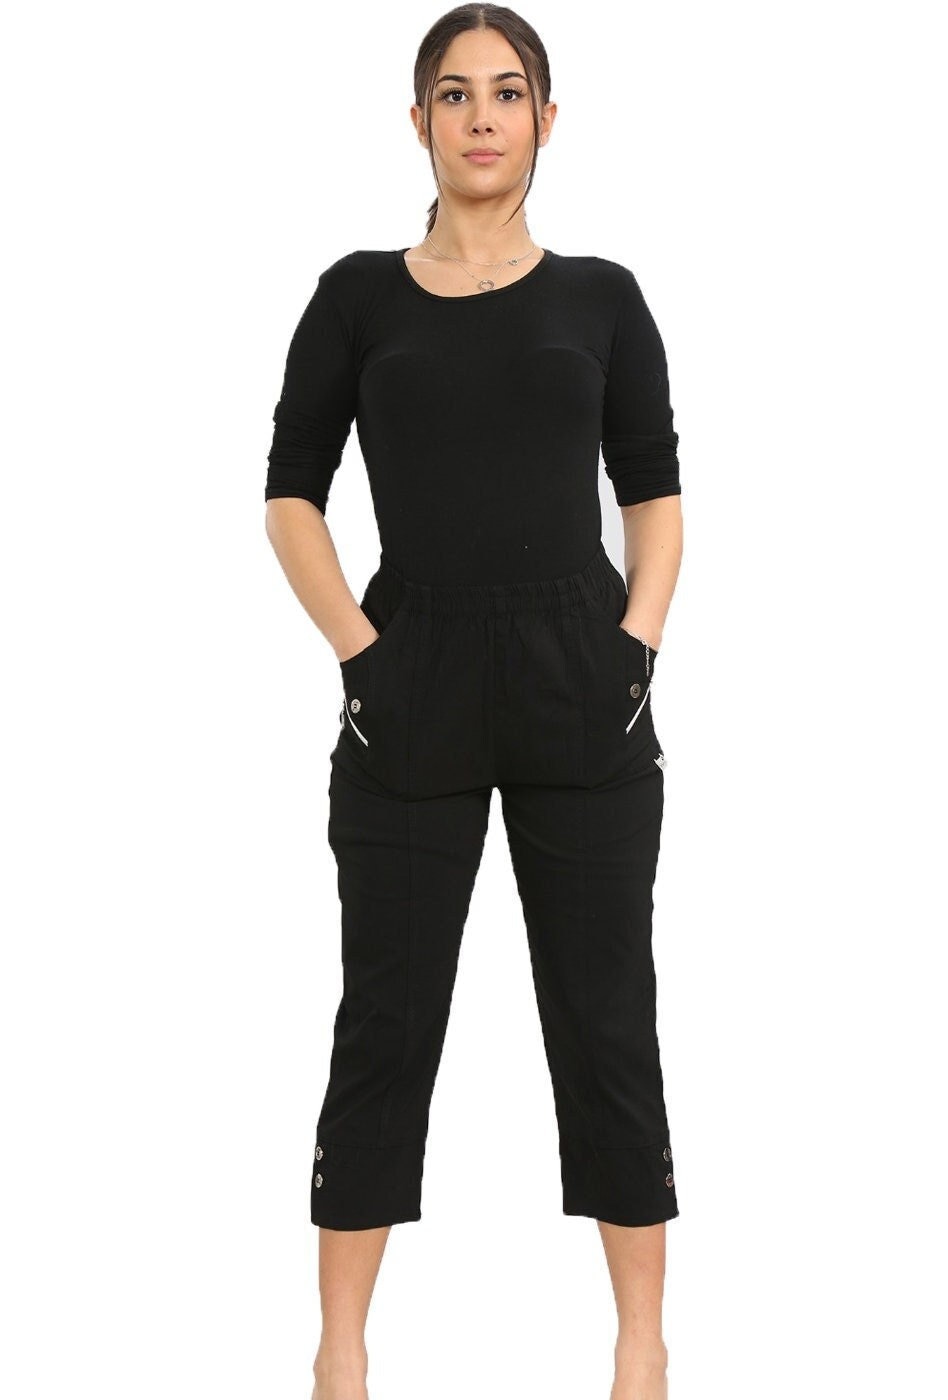 Buy Cropped Trousers Online